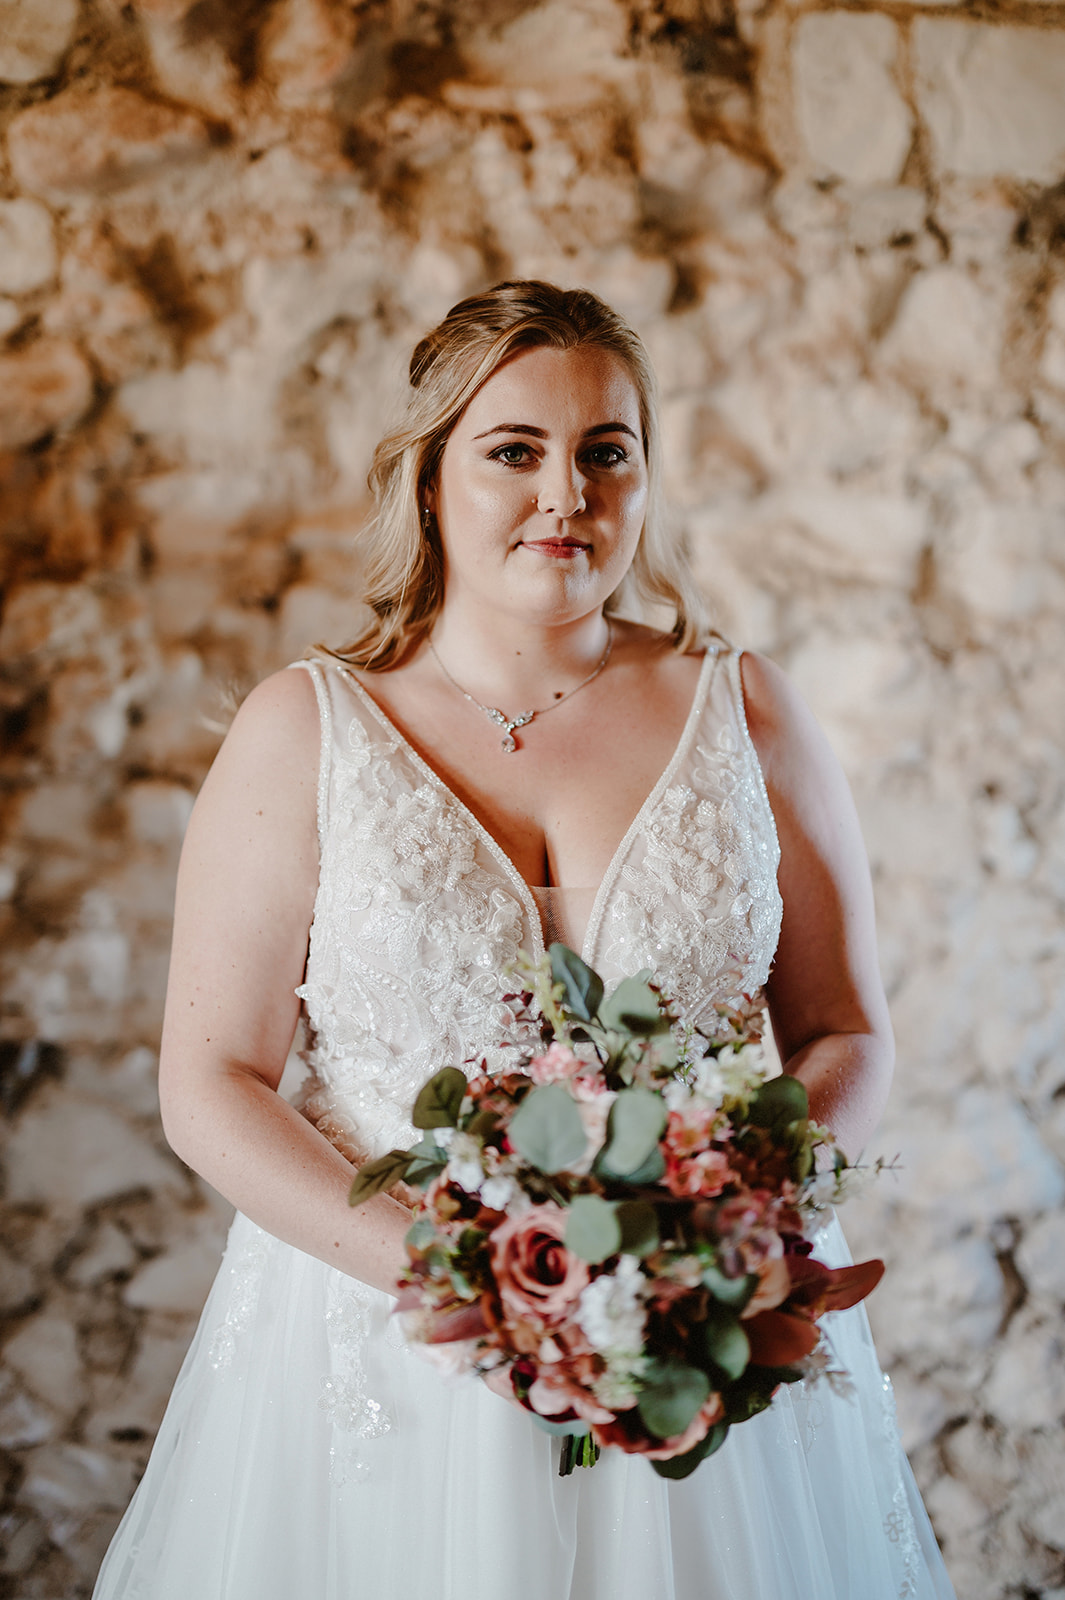 beautiful bride in front of a bare brick wall at pentney abbey smiling minutes before the wedding ceremony by james pearce wedding photographer